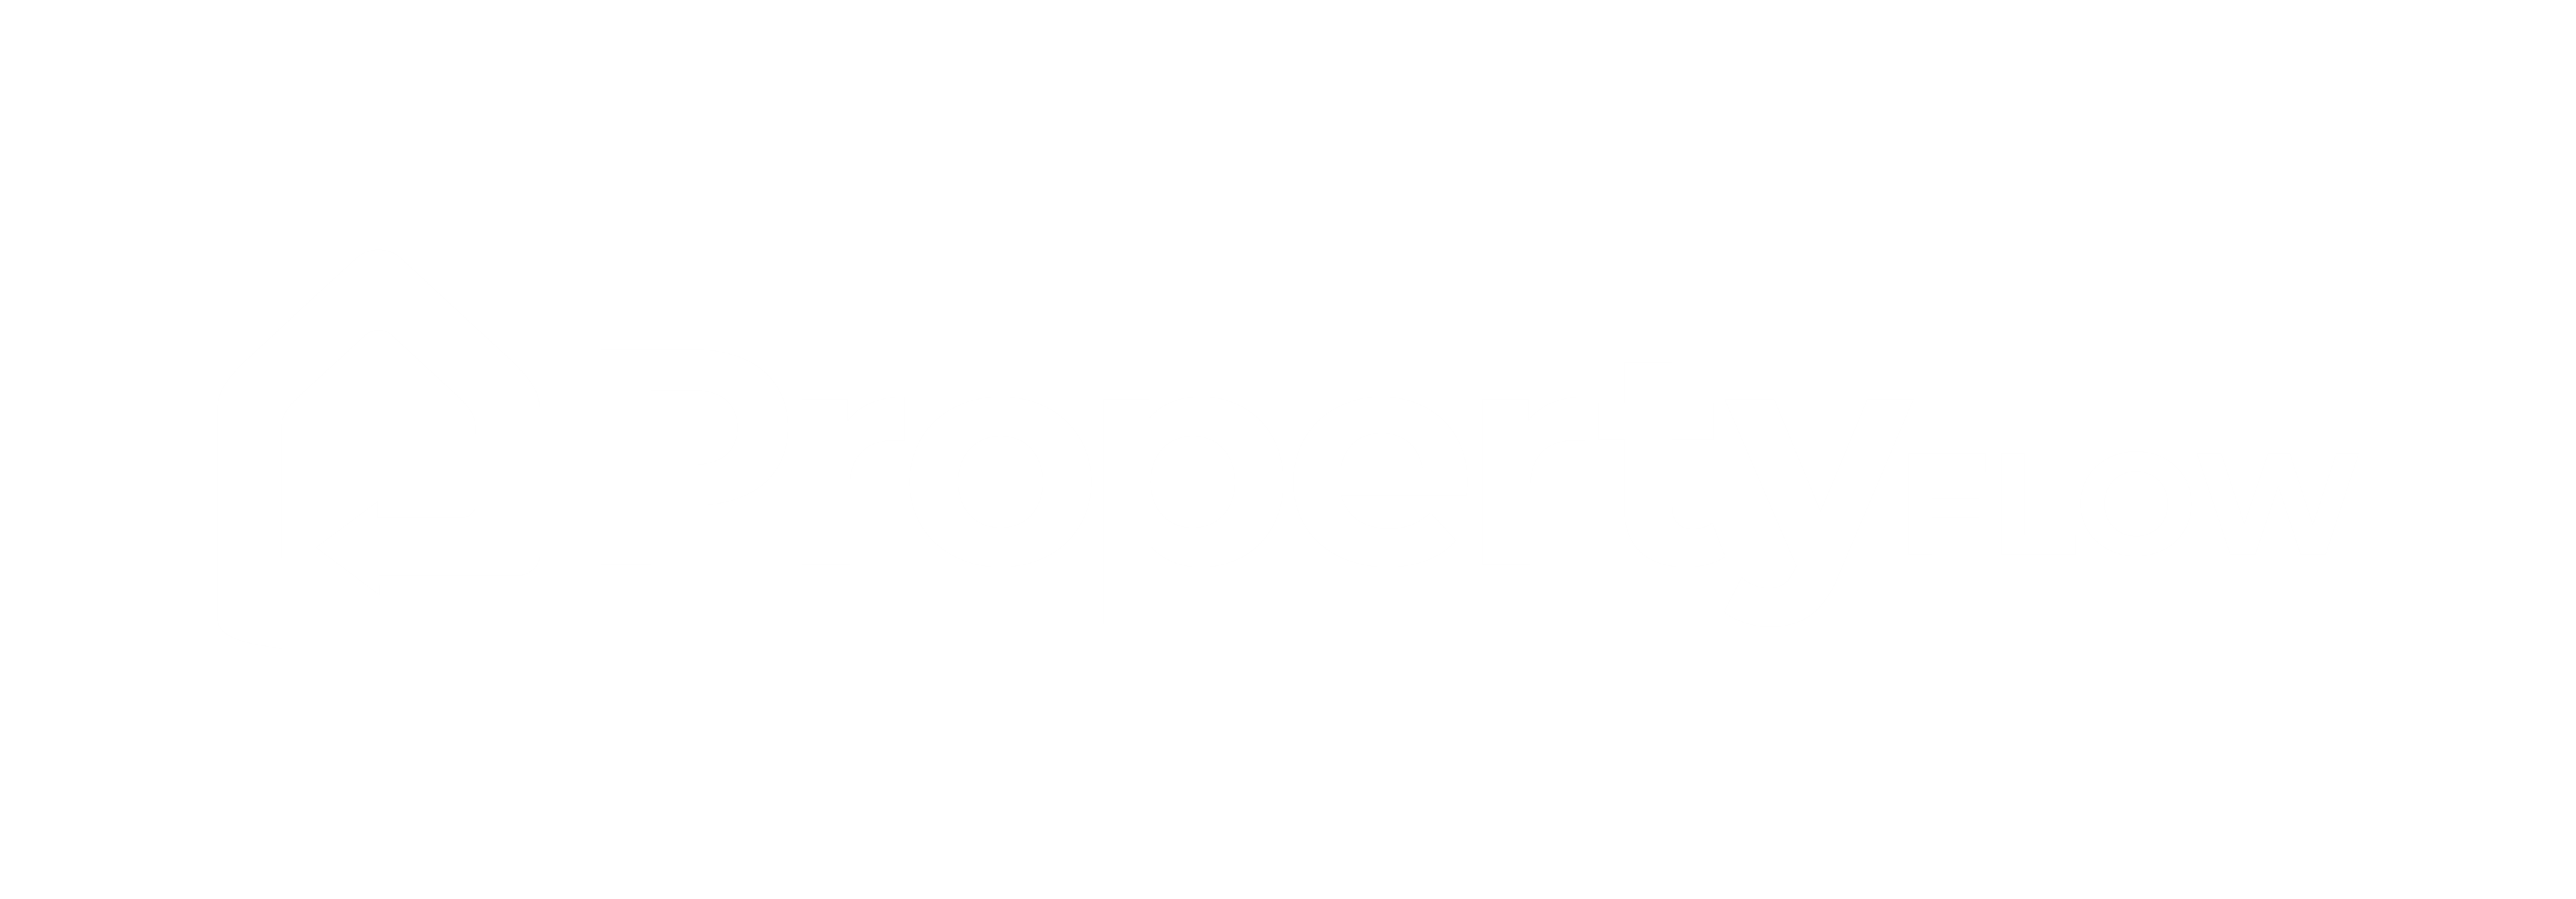 Become a Happy Property Owner upto 20% off